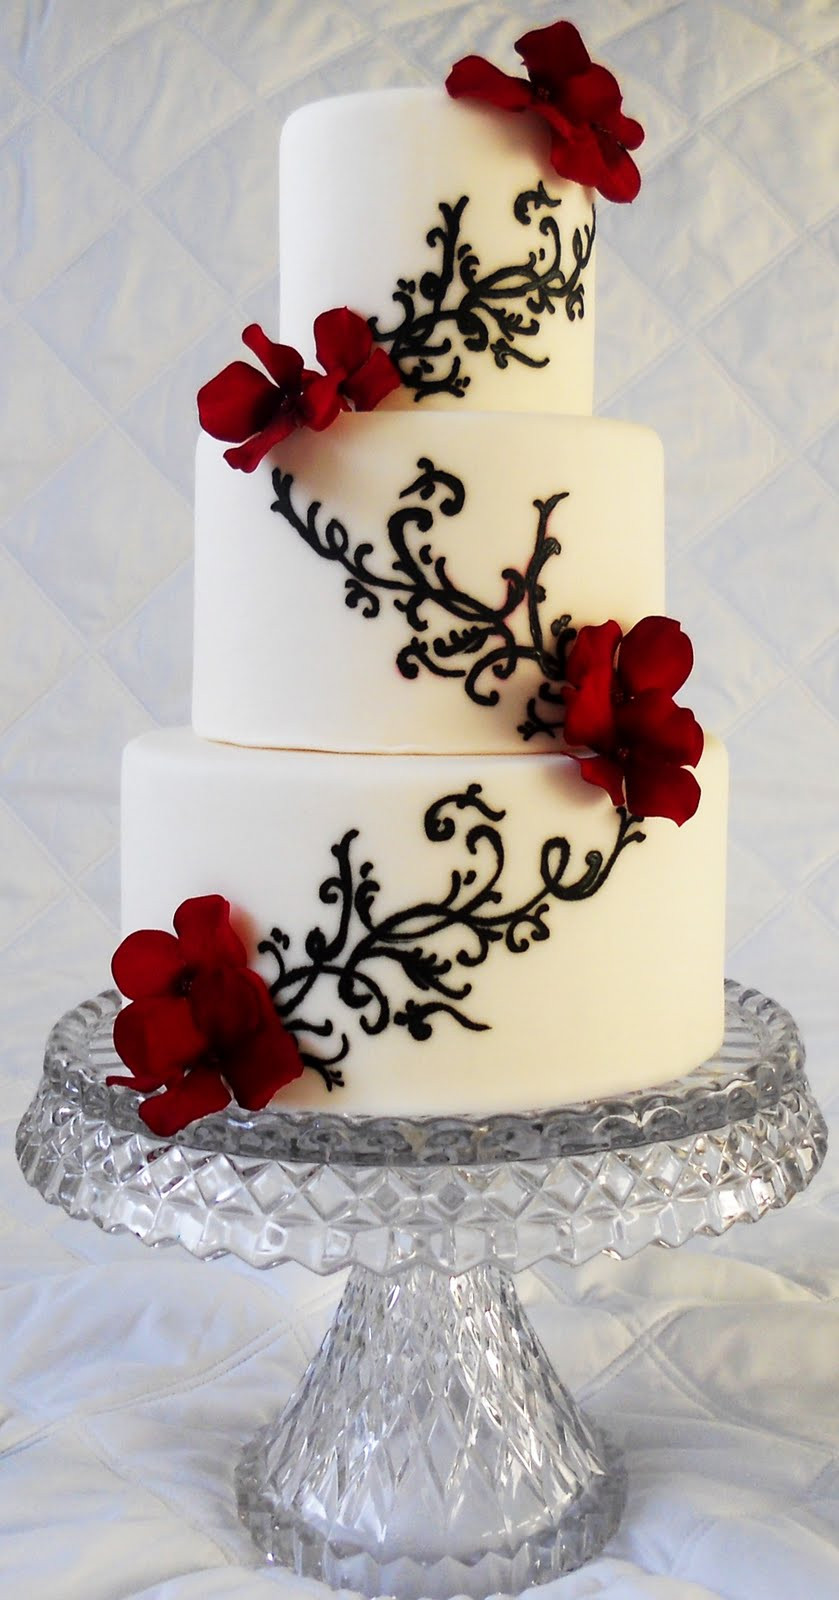 Red And White Wedding Cakes
 Memorable Wedding Find the Best Red Black and White